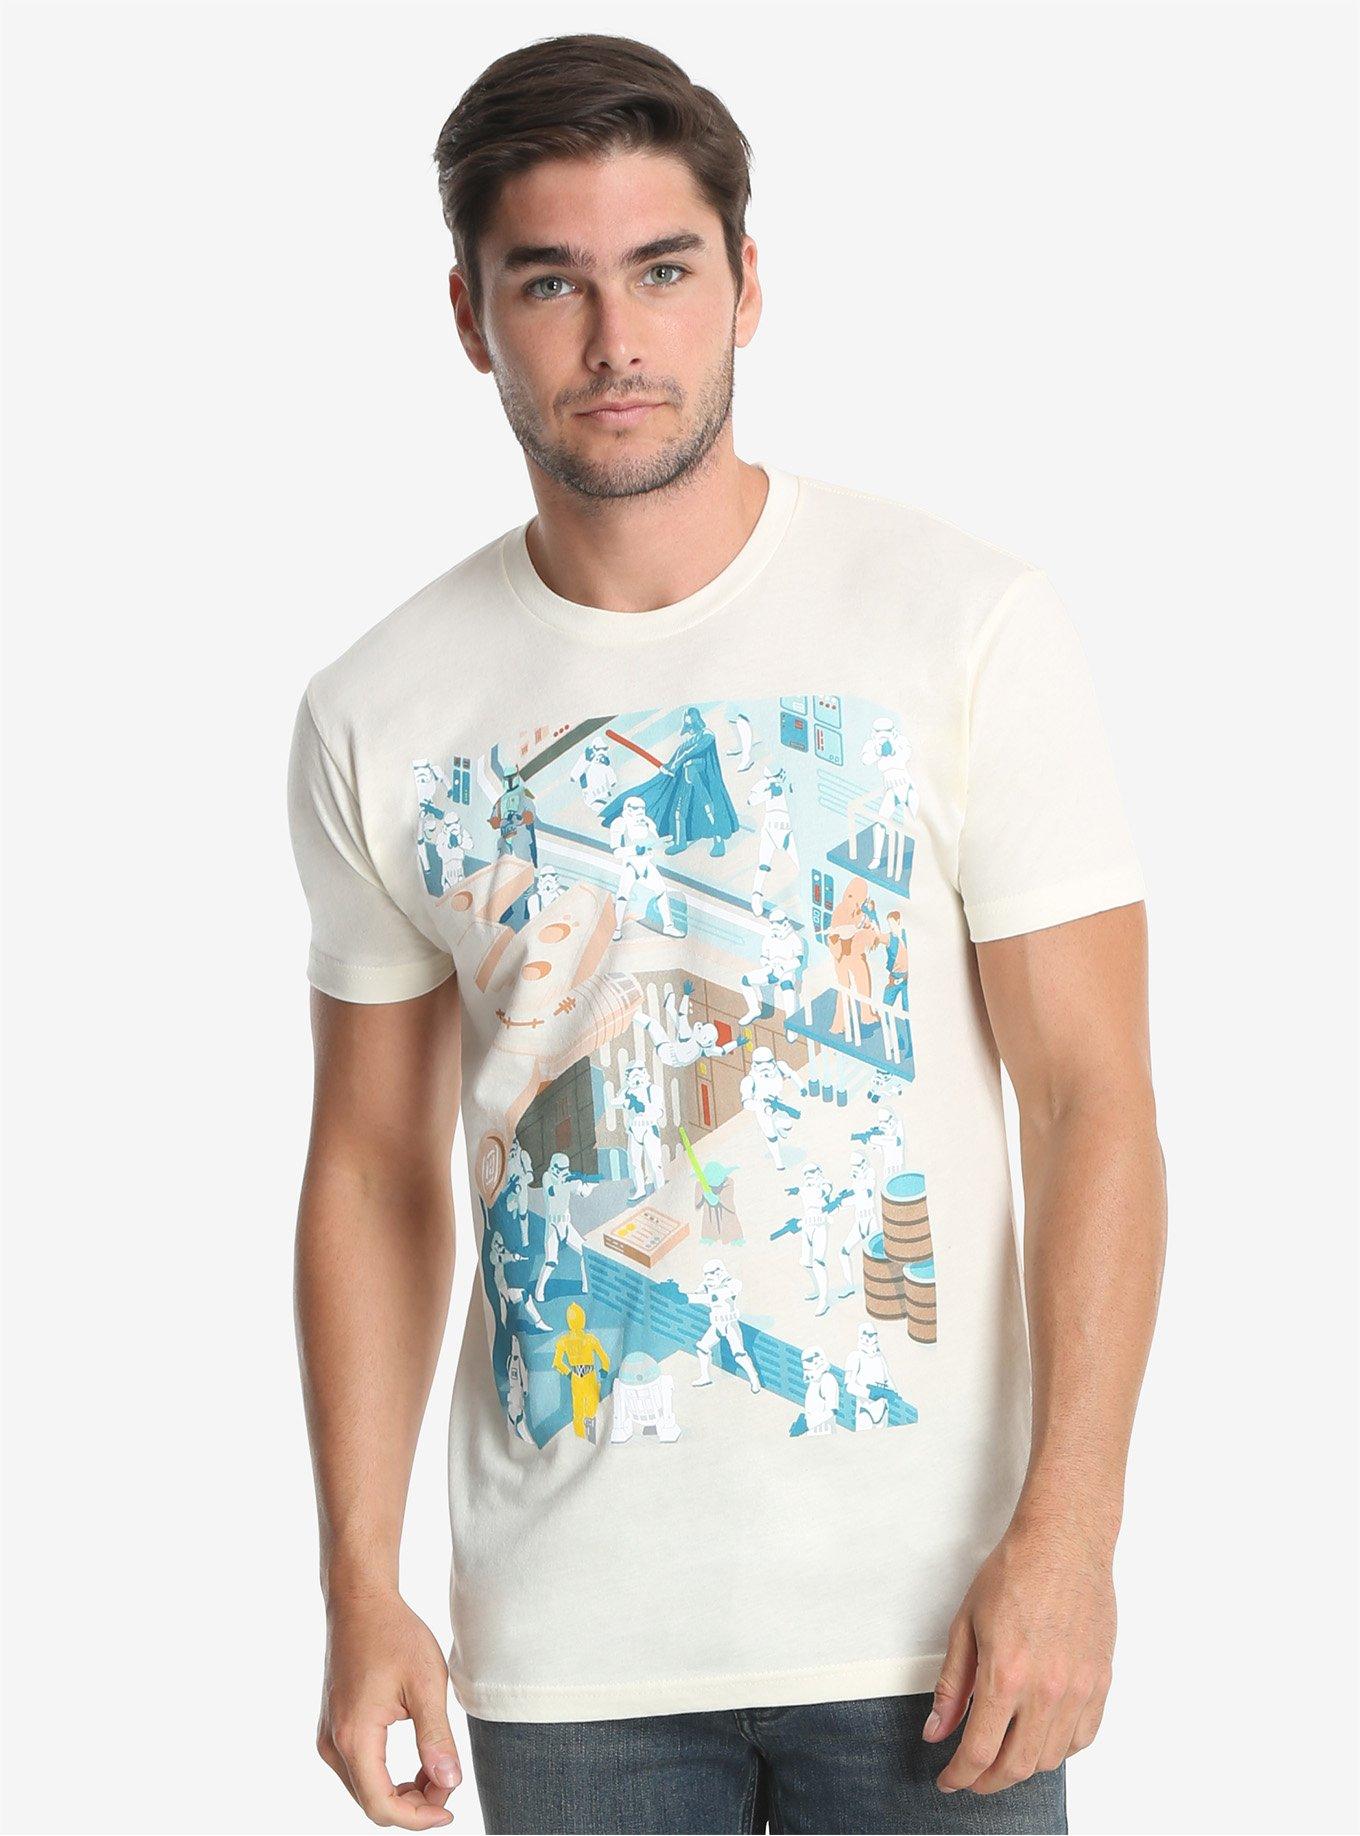 Star Wars Surreal Painting T-Shirt - BoxLunch Exclusive, WHITE, hi-res